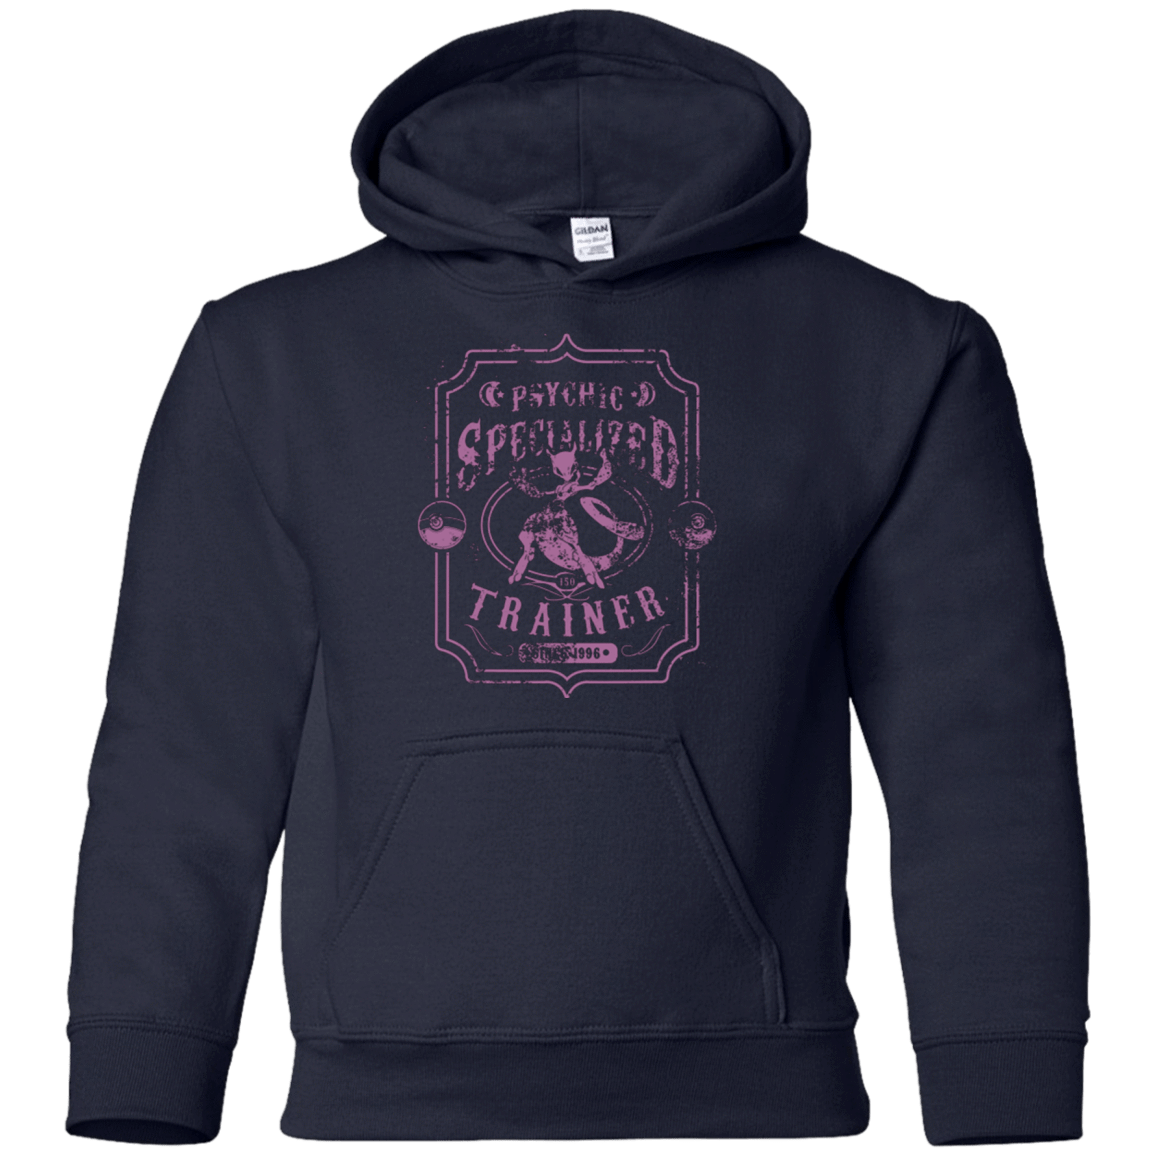 Sweatshirts Navy / YS Psychic Specialized Trainer 2 Youth Hoodie